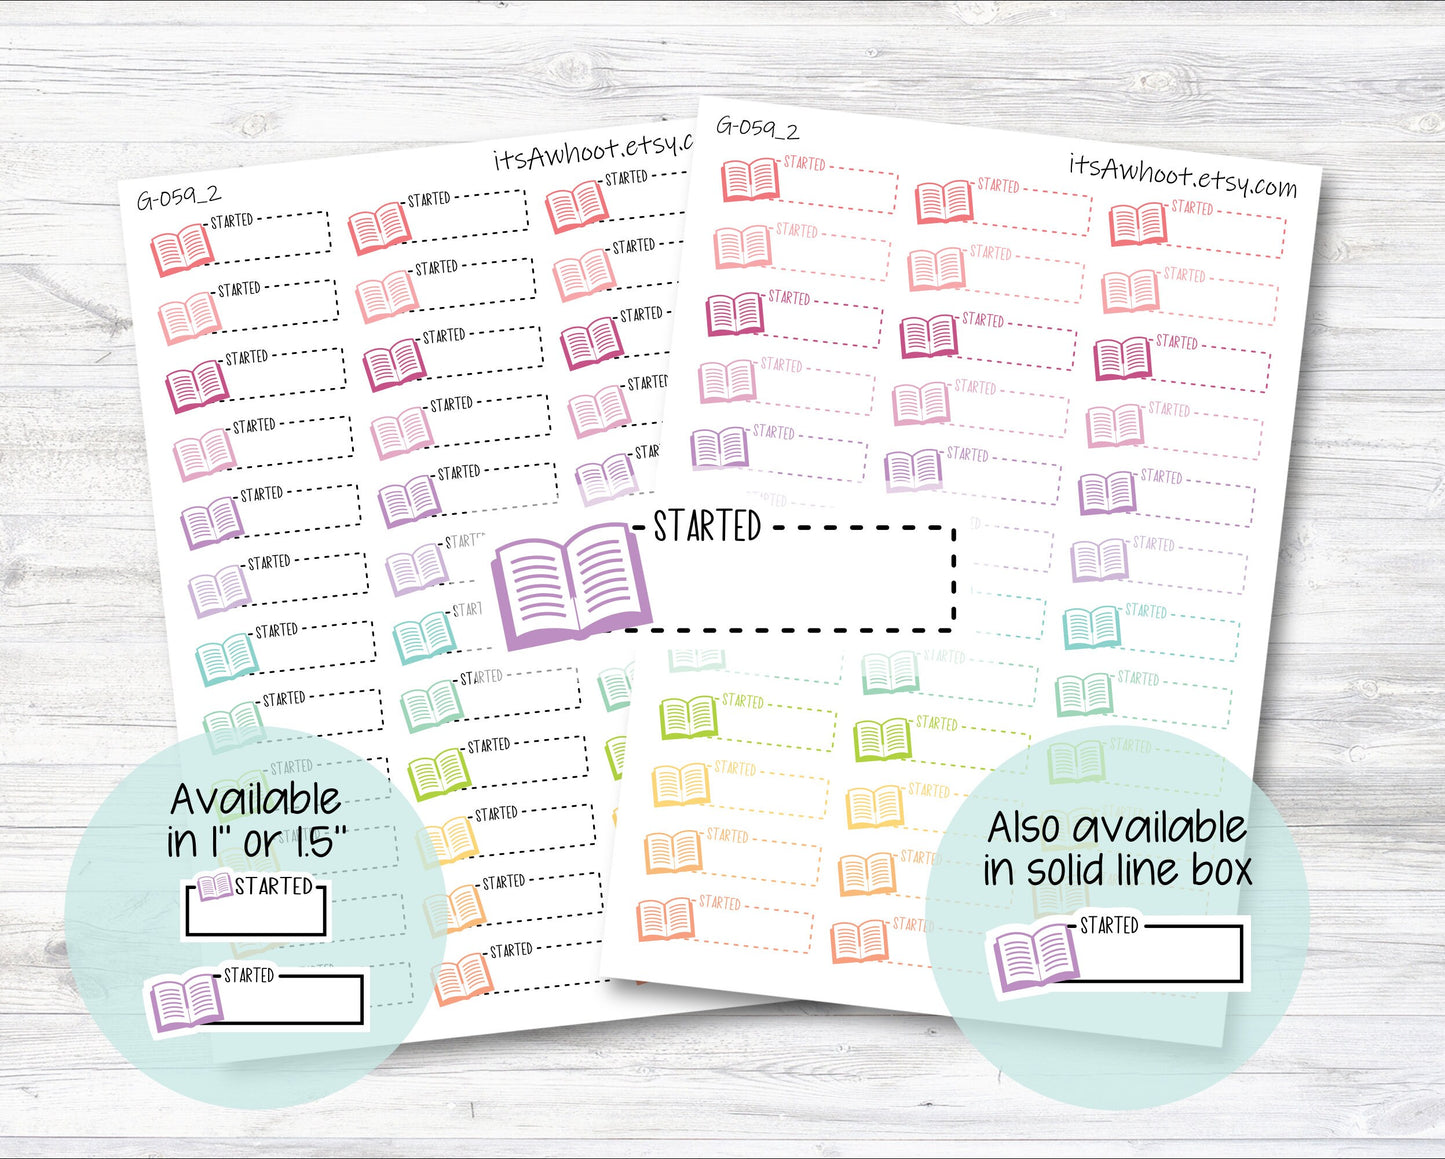 STARTED with Book icon Quarter Box Label Planner Stickers - Dash or Solid / One Inch or 1.5" Inch (G059_2)